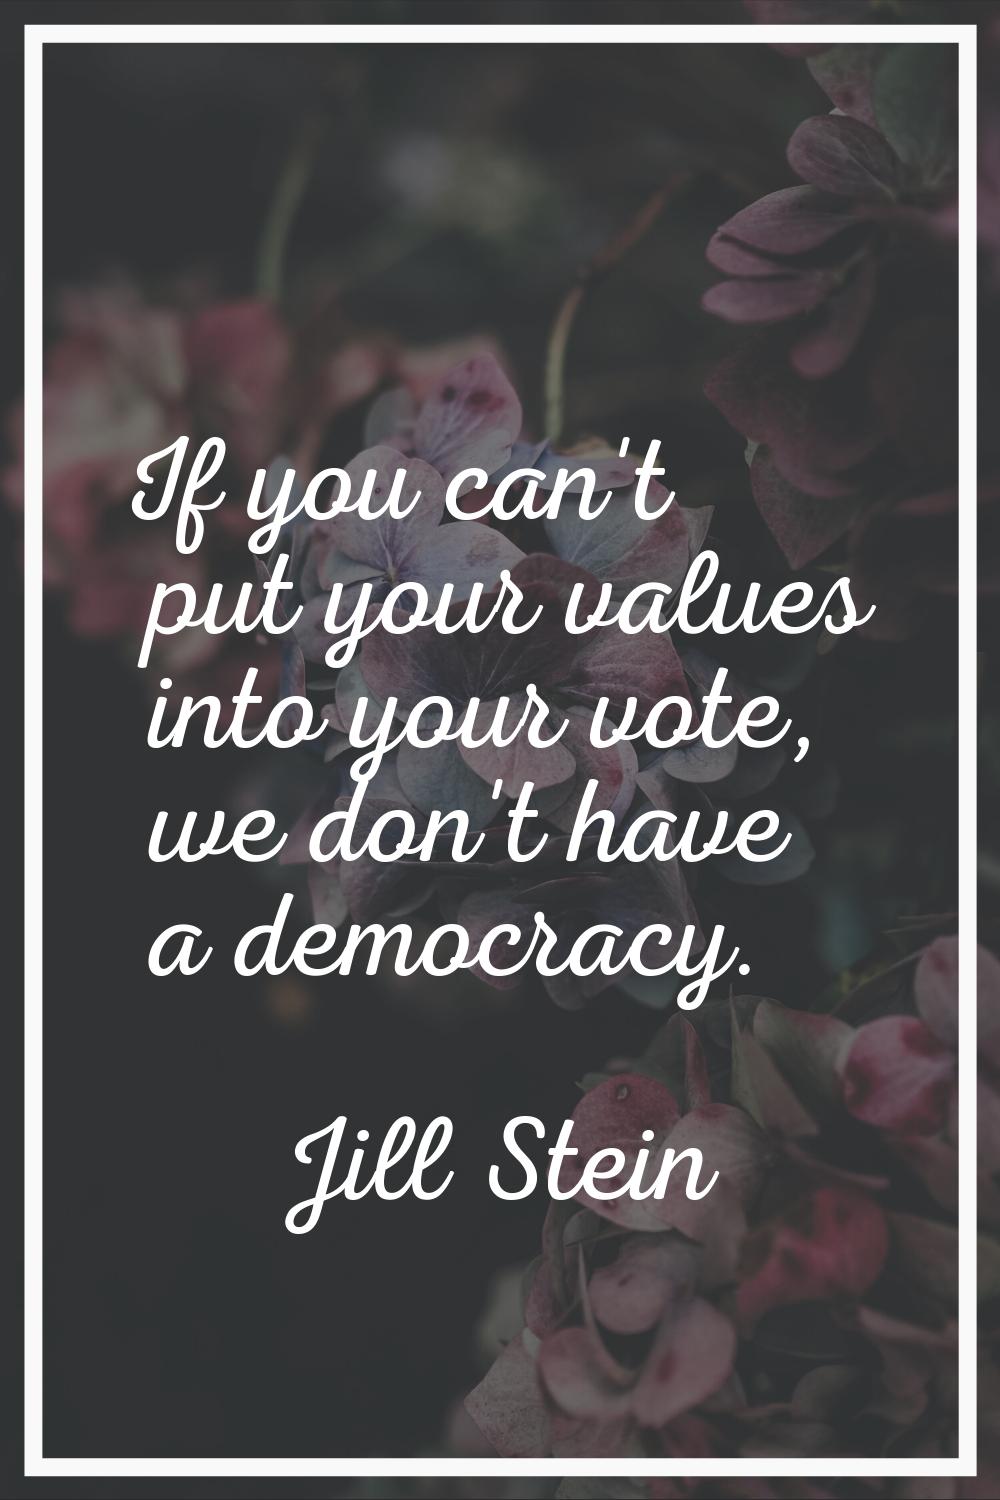 If you can't put your values into your vote, we don't have a democracy.